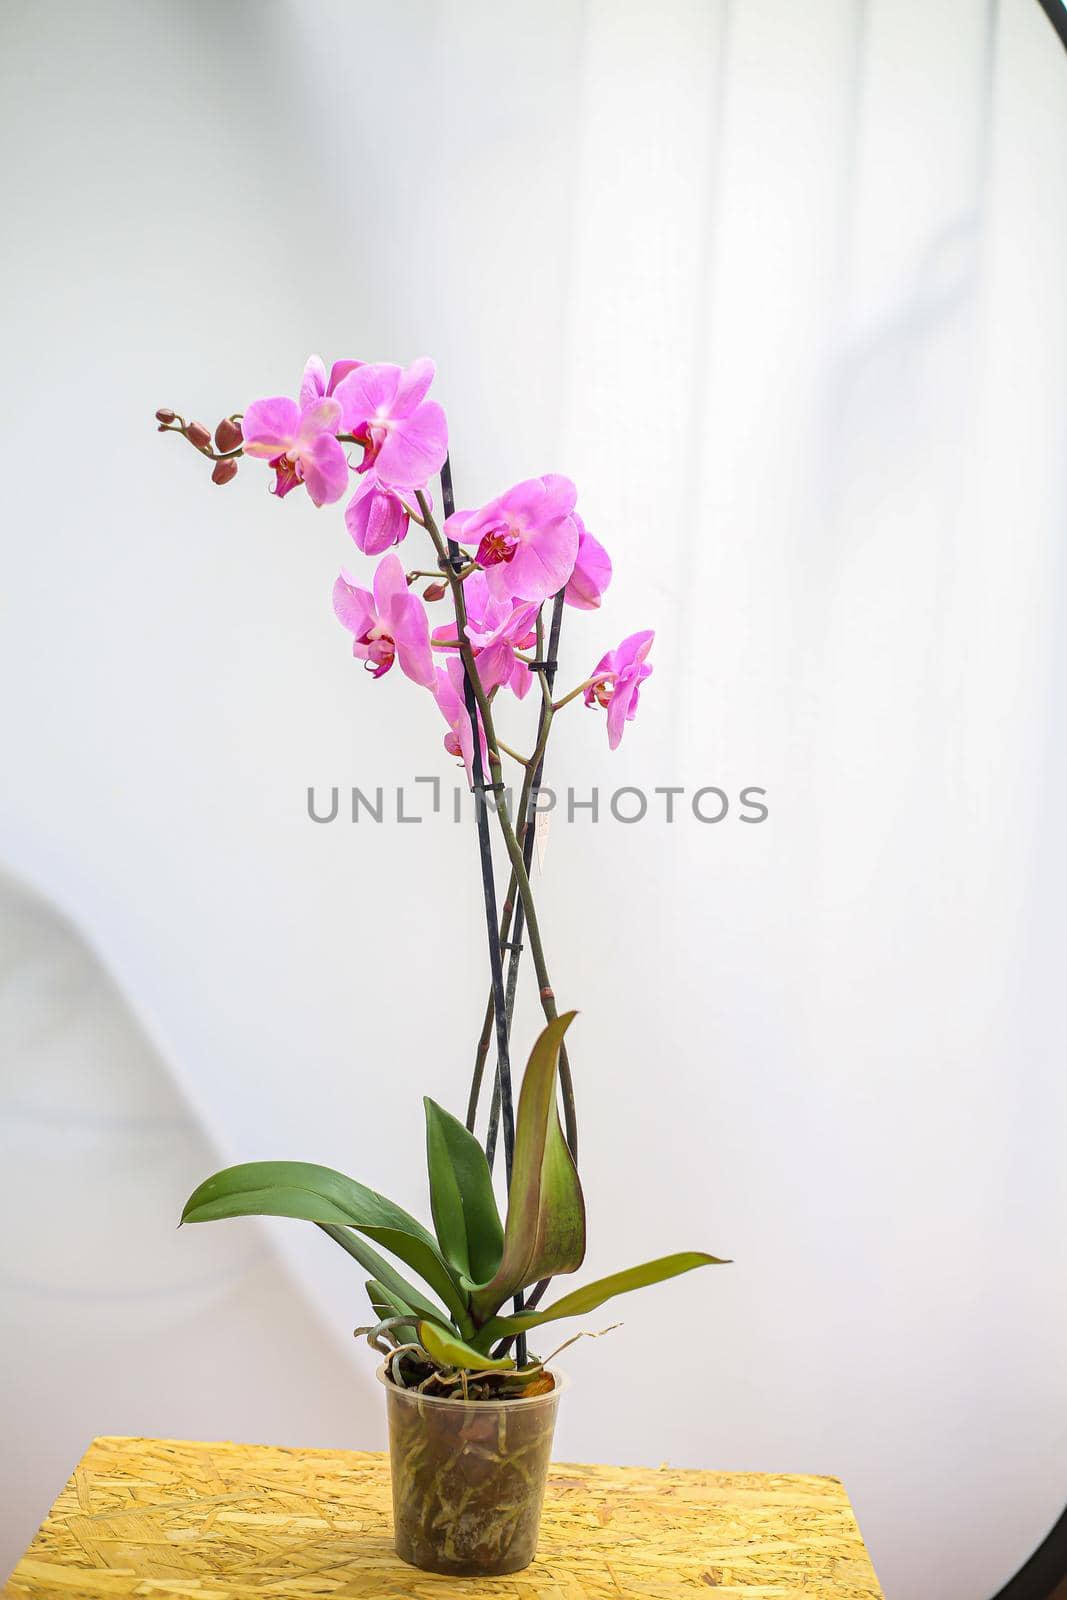 Beautiful tropical orchid flower. isolated purple orchid flower. white background. Space for text